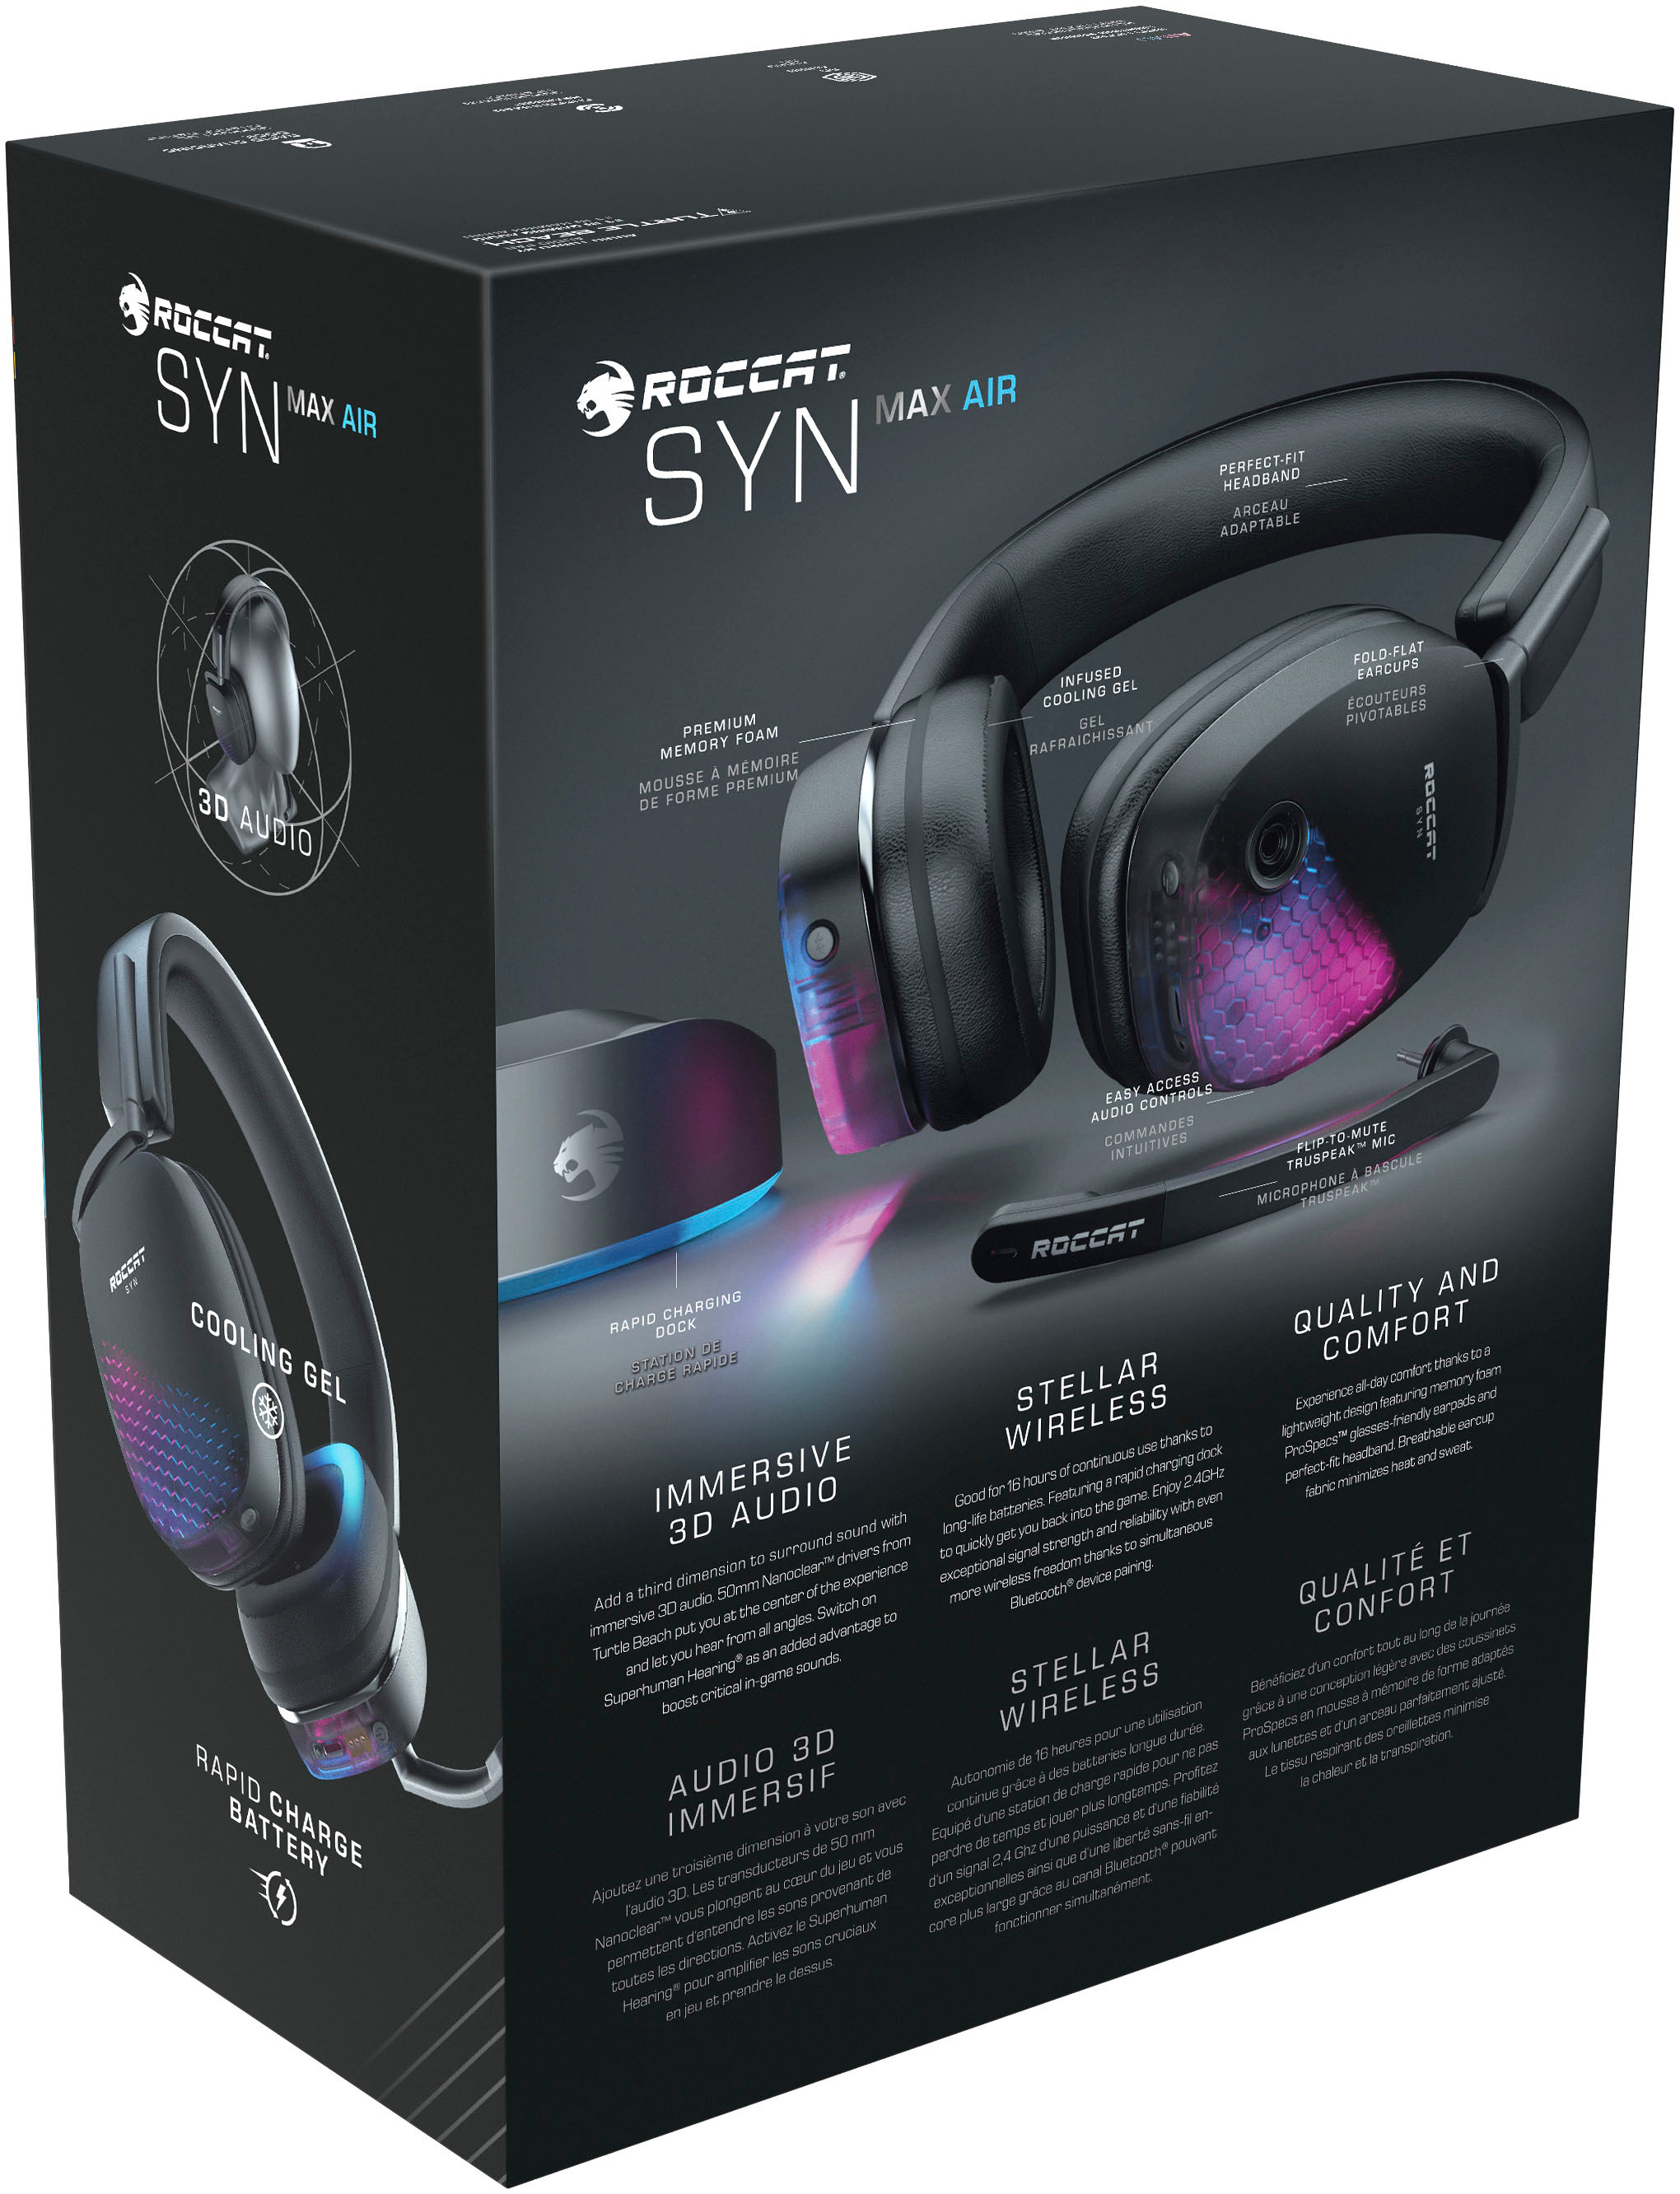 PC Best for Black ROC-14-155-01 SYN - ROCCAT Air Gaming Headset Wireless Max Buy